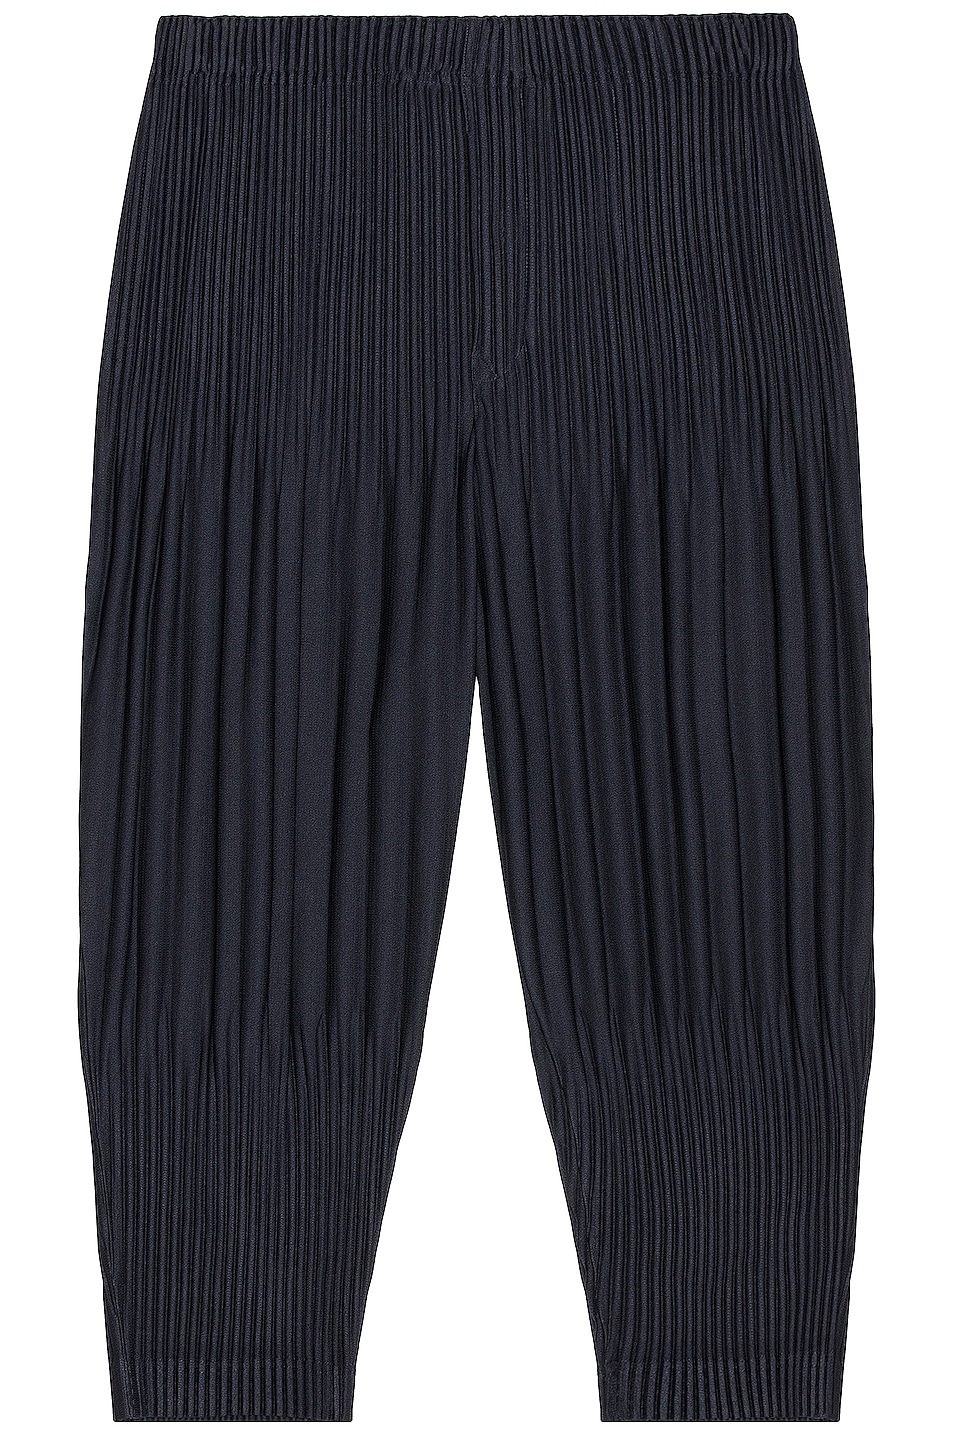 Image 1 of Homme Plisse Issey Miyake Basic Cropped Pants in Navy